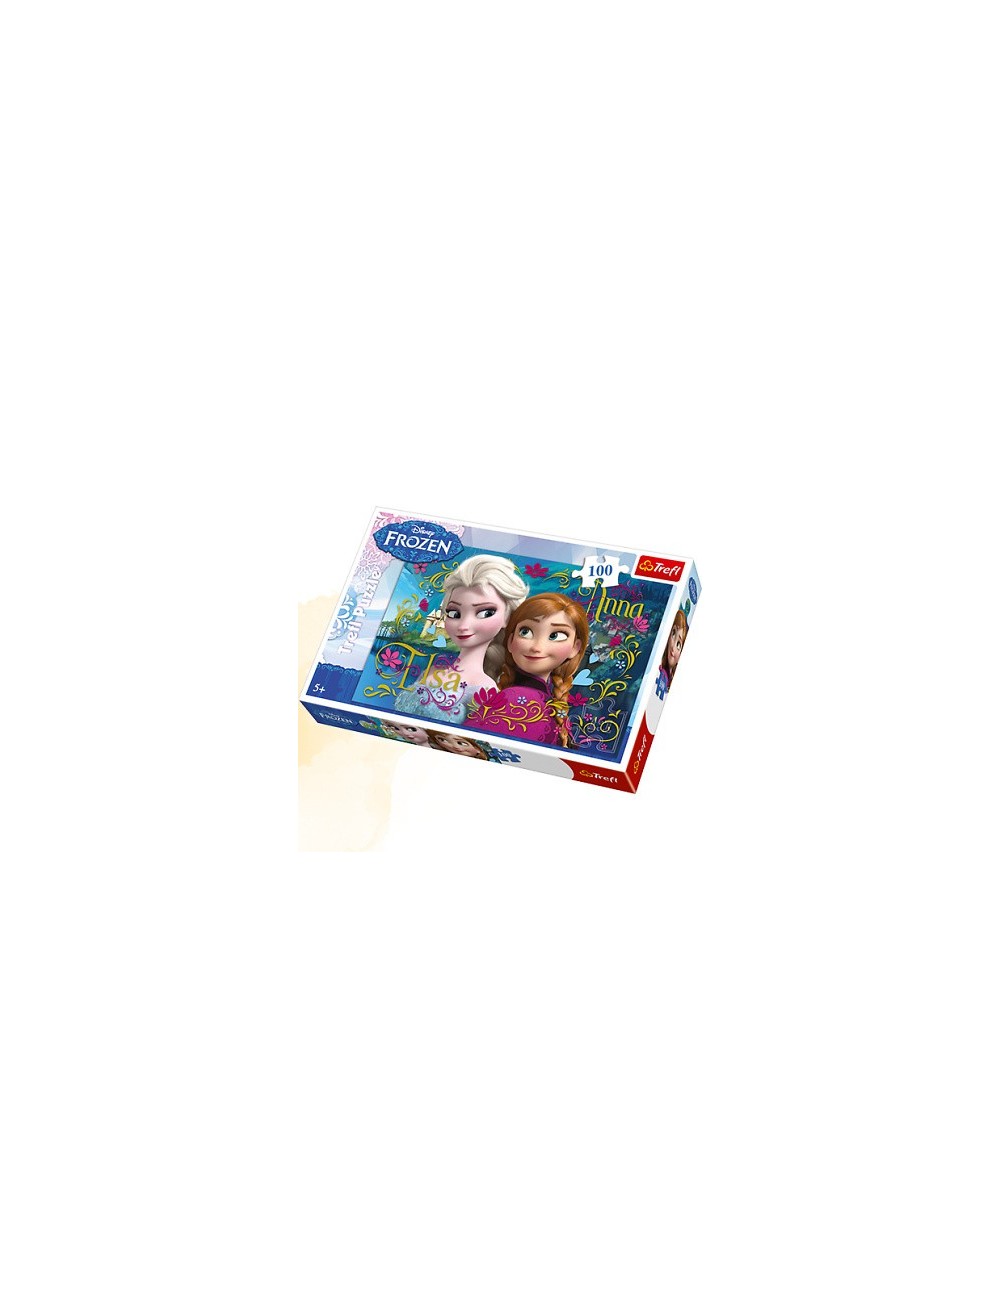 Federal admire Discover Puzzle 100 piese, Ana si Elsa Disney Frozen